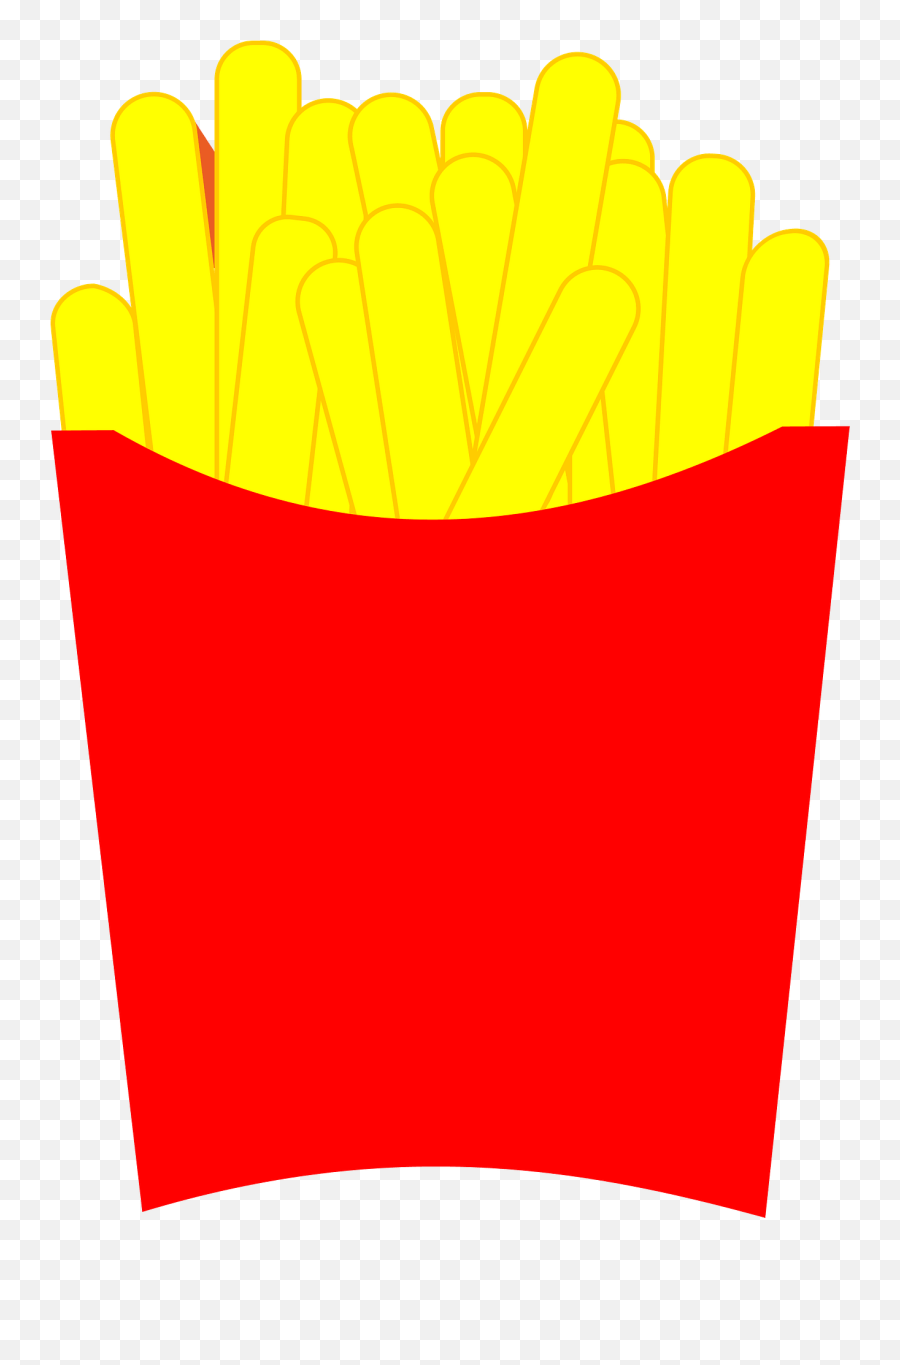 French Fries In A Red Carton Clipart - Solid Emoji,French Fries Clipart